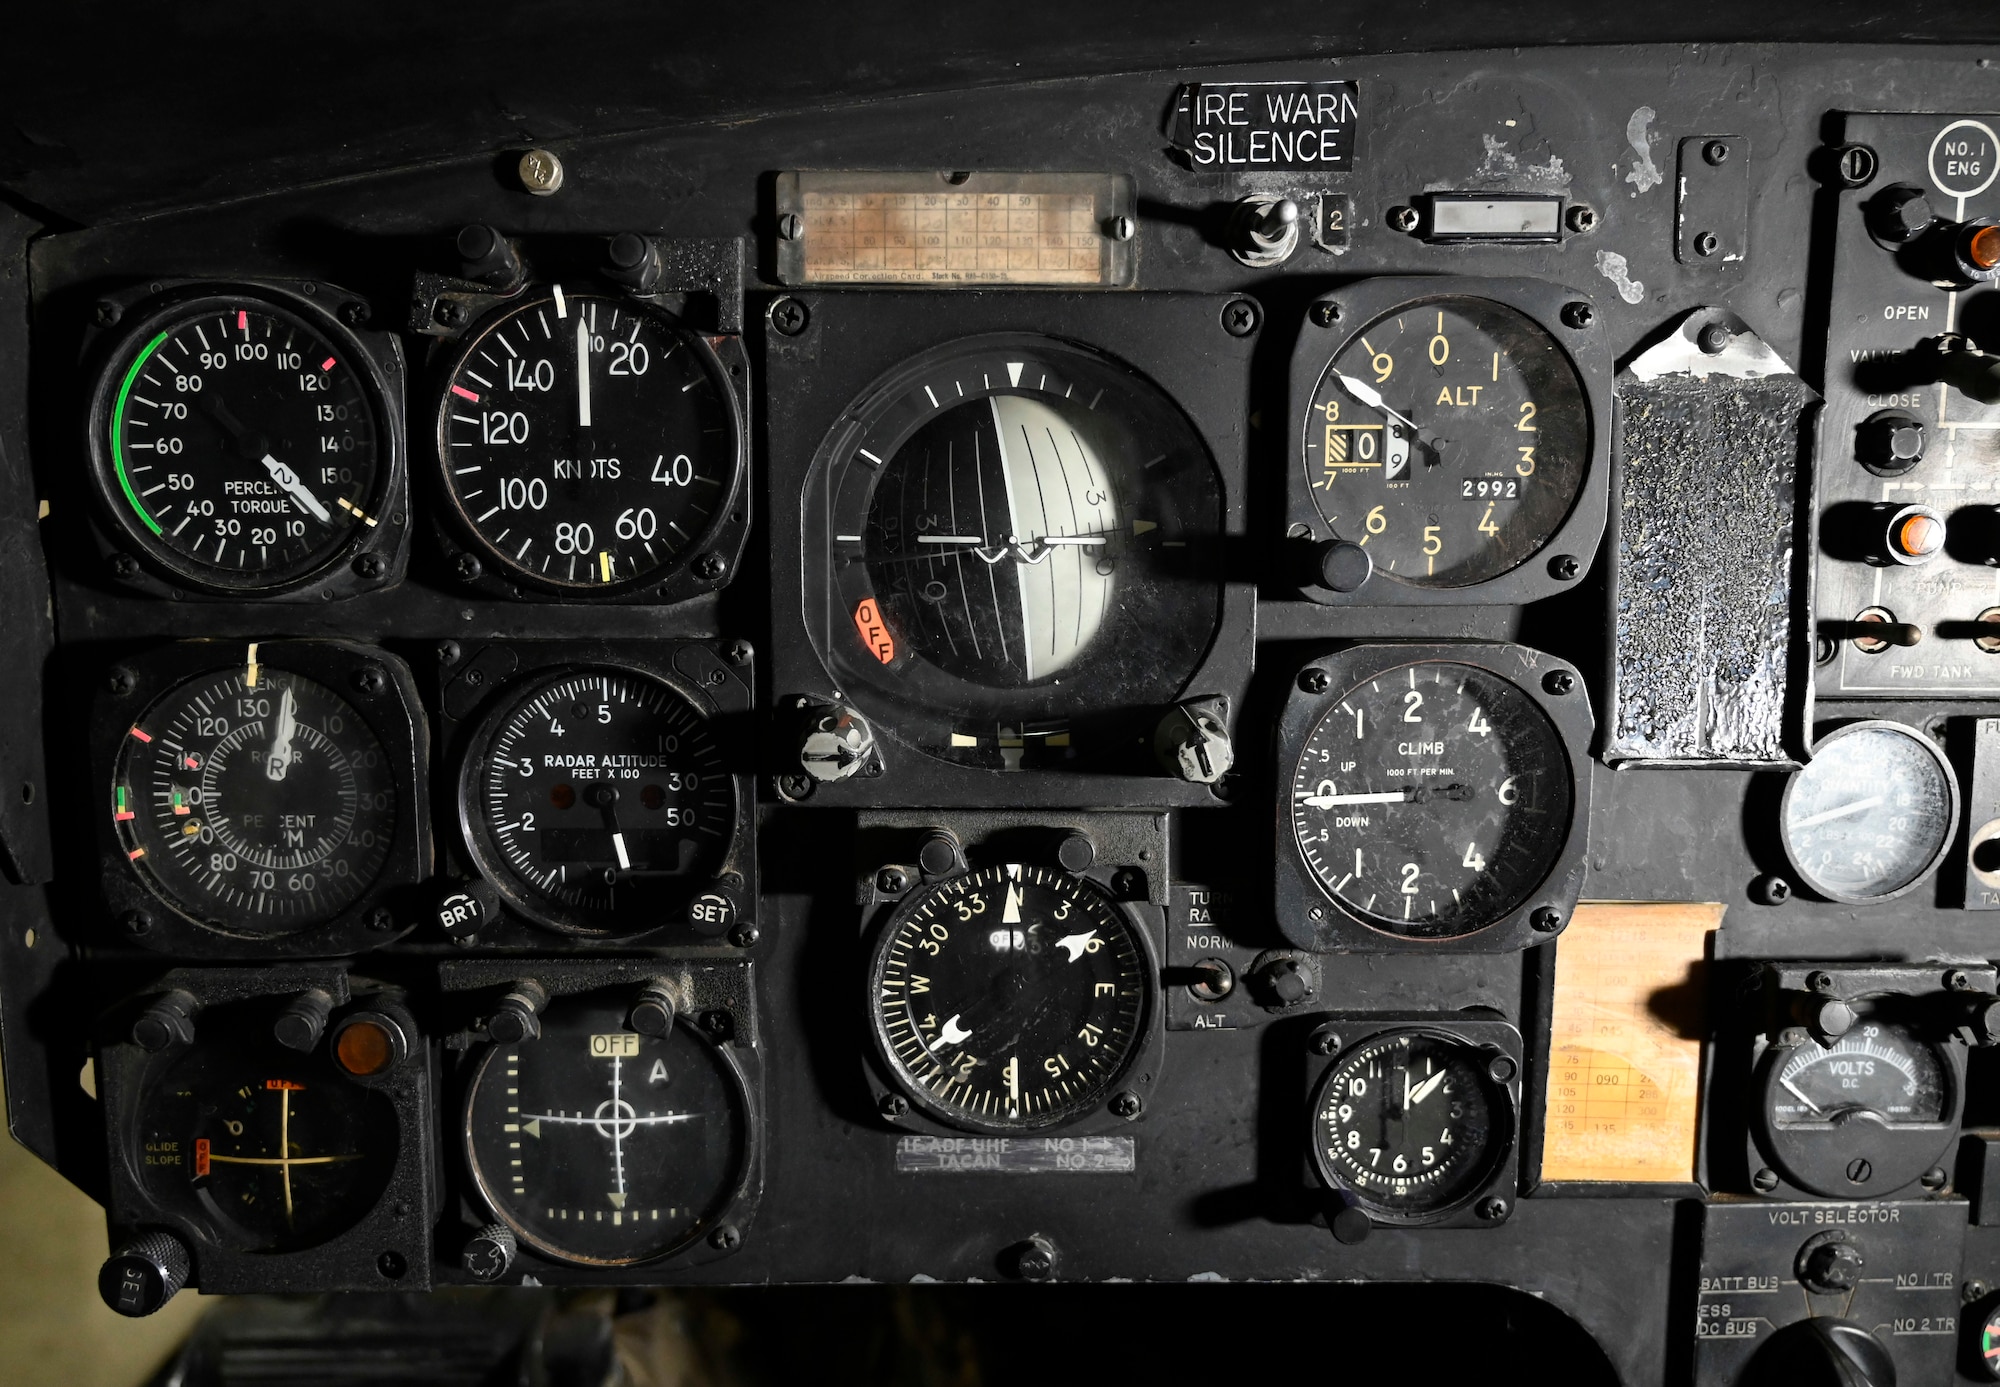 Interior views of the Sikorsky CH-3E Black Mariah helicopter.